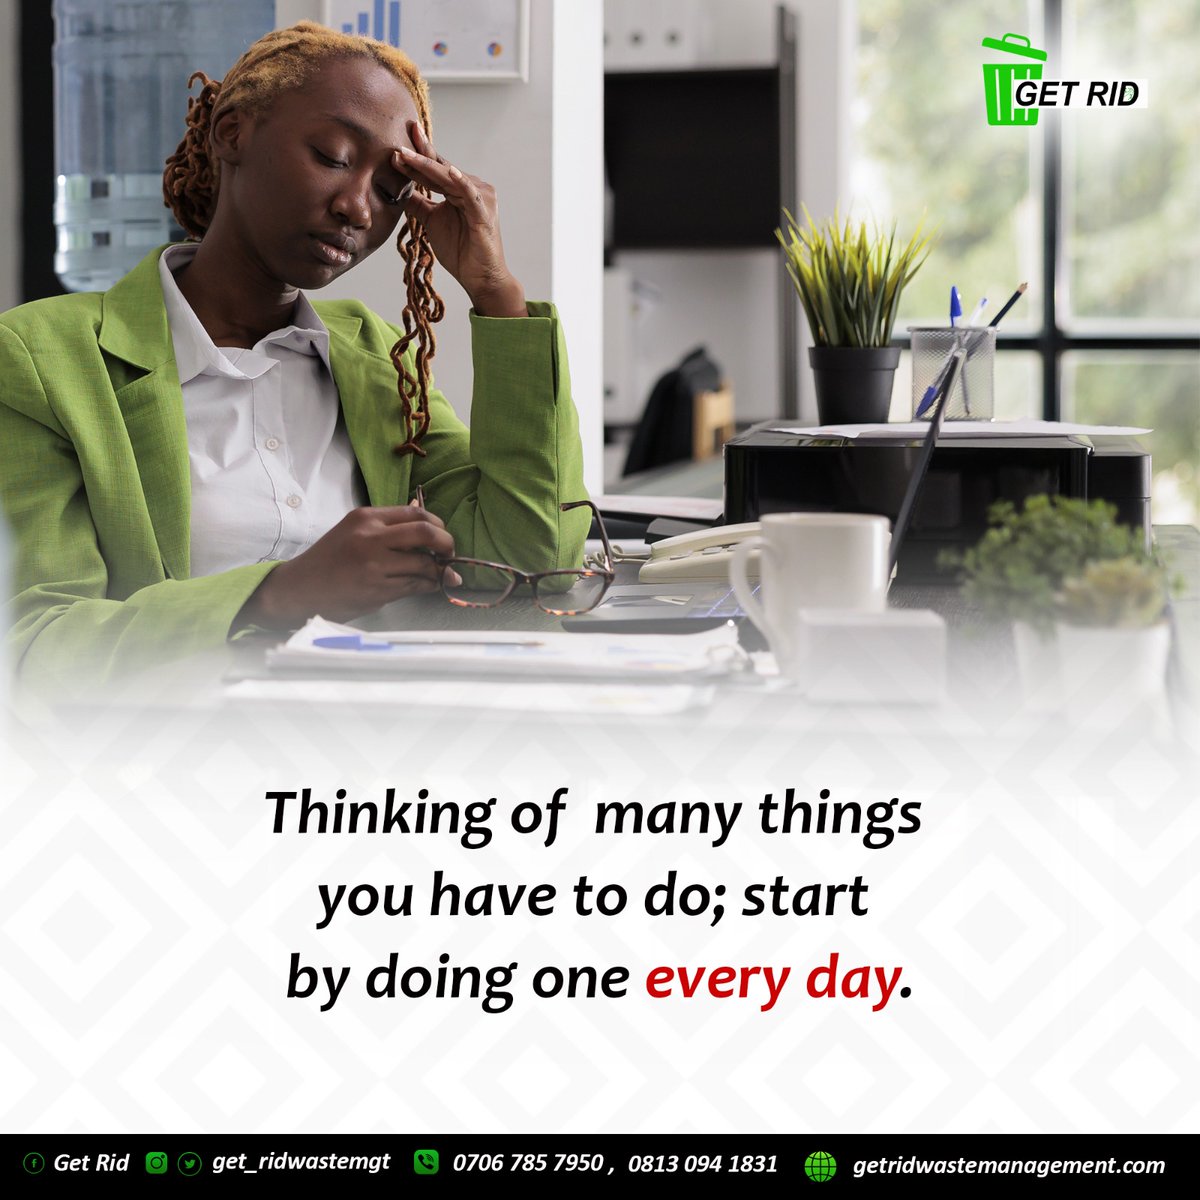 Thinking too much about things we have to do may overwhelm us and scare us off.

Start by trying to complete one out of the many tasks each day. 

#monday #mondaymotivation #mondaymorning #uyo #uyobusiness #uyovendorshub #uyovendors #uyovendorsconnect #akwaibomgirls #ibombiz